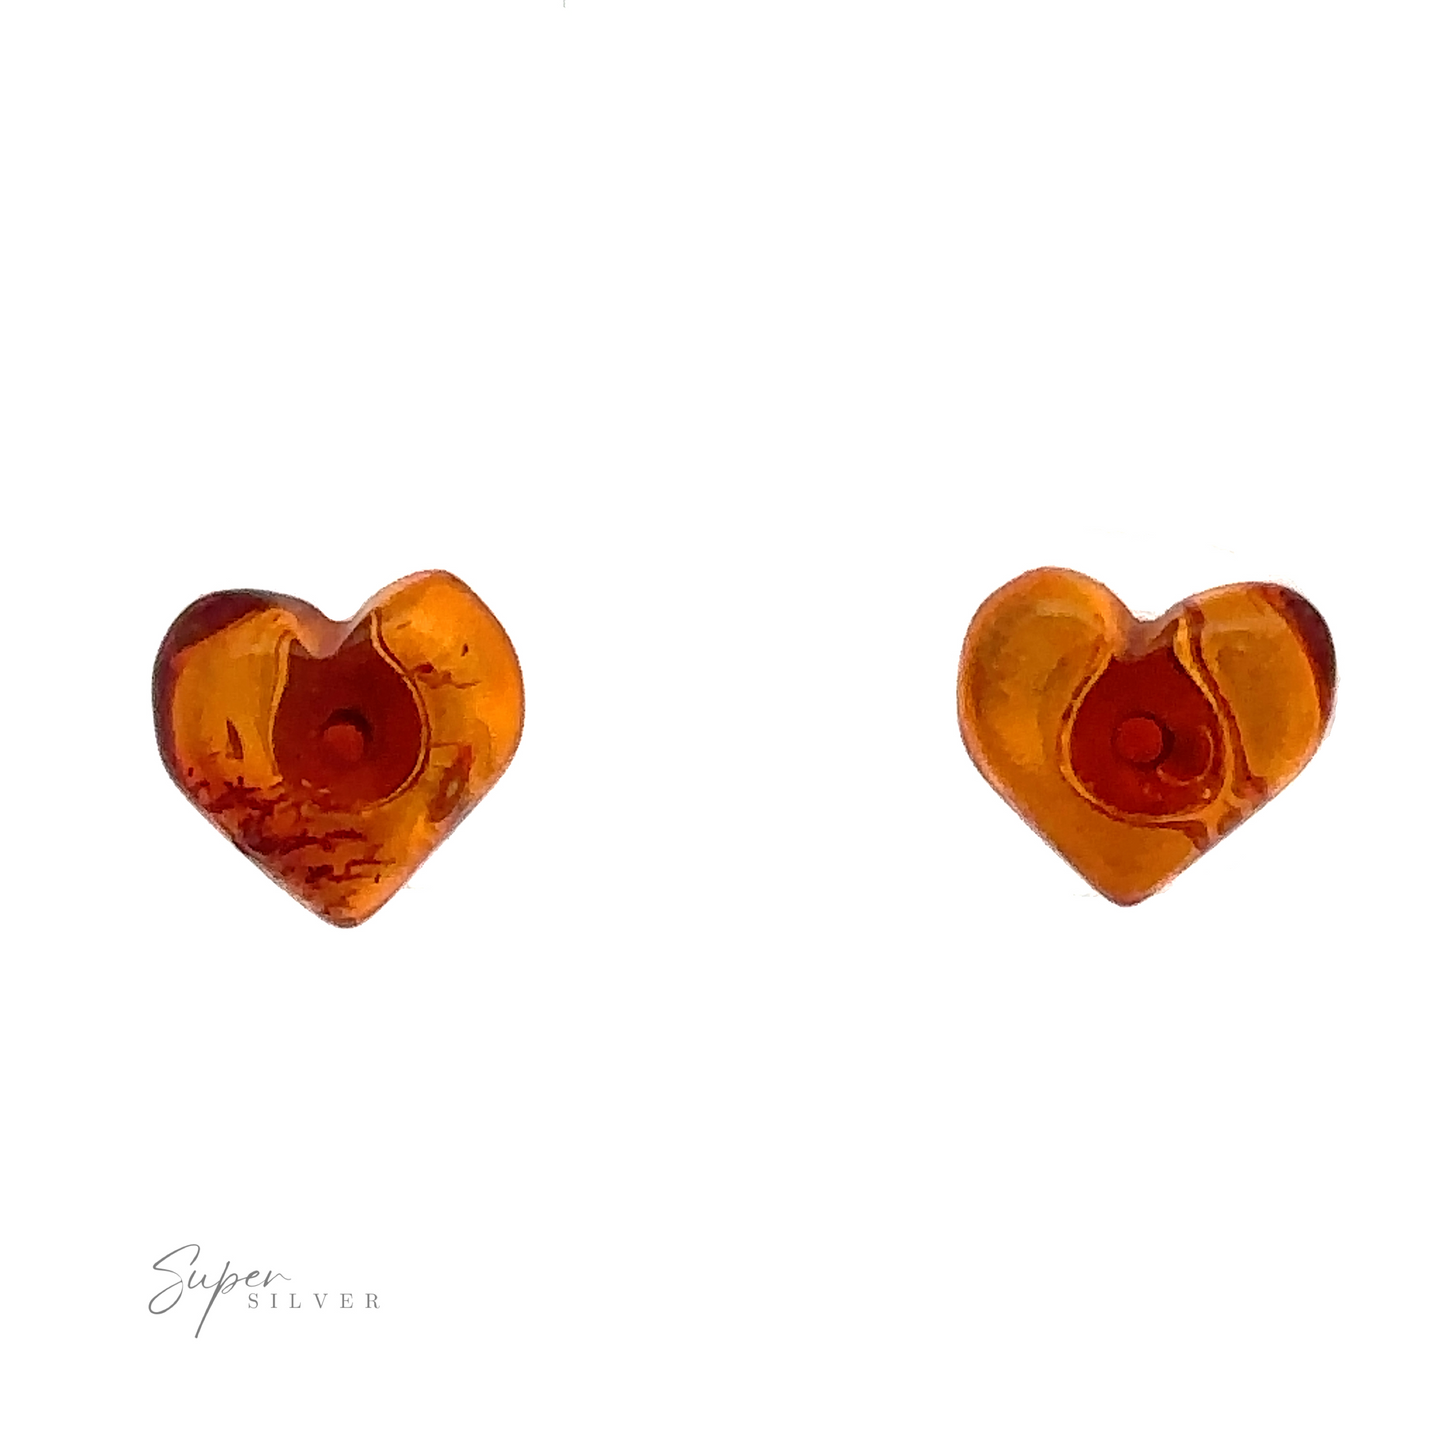 
                  
                    A pair of small heart-shaped amber earrings with dark inclusions, set against a white background. The bottom left corner has the words "Super Silver" written in script font. These Amber Heart Studs are perfect for anyone who appreciates Baltic Amber Jewelry’s timeless elegance.
                  
                